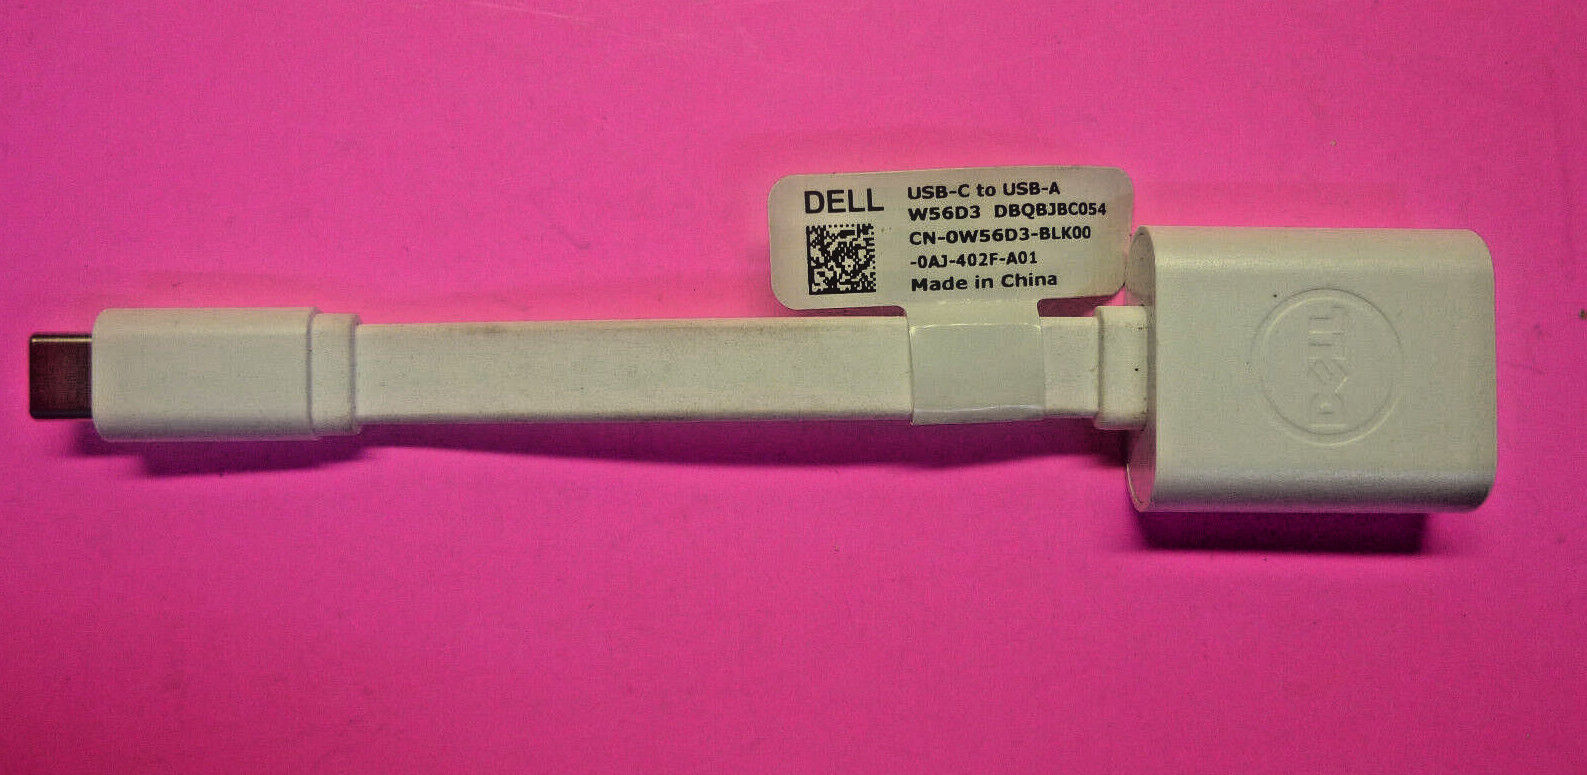 Genuine Dell USB-C To USB-A Adapter Cable White DBQBJBC054 W56D3